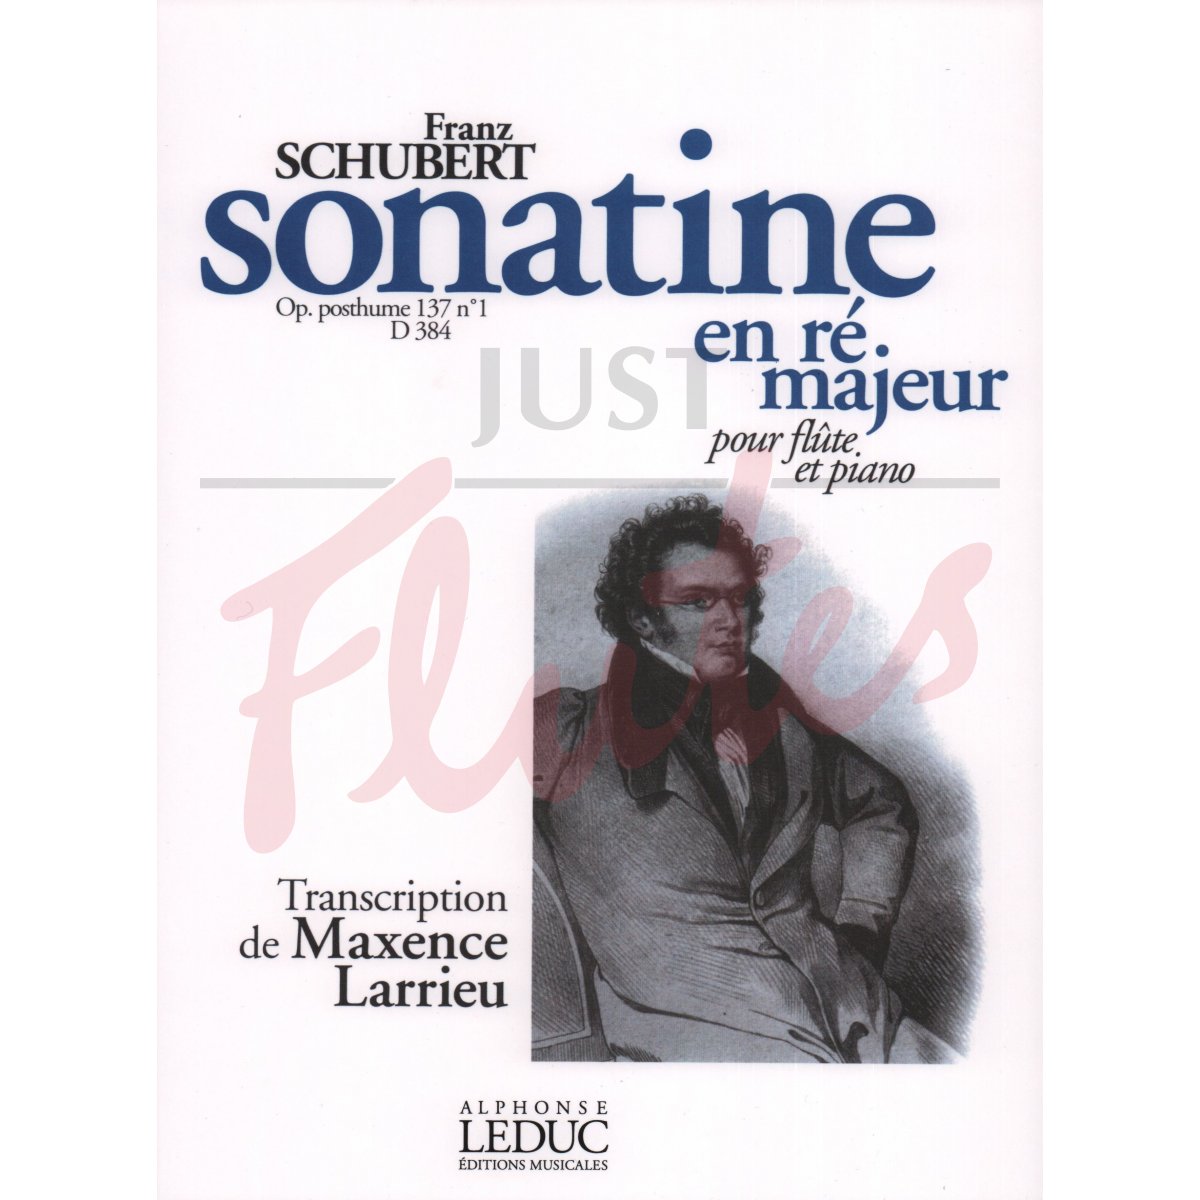 Sonatine in D major for Flute and Piano